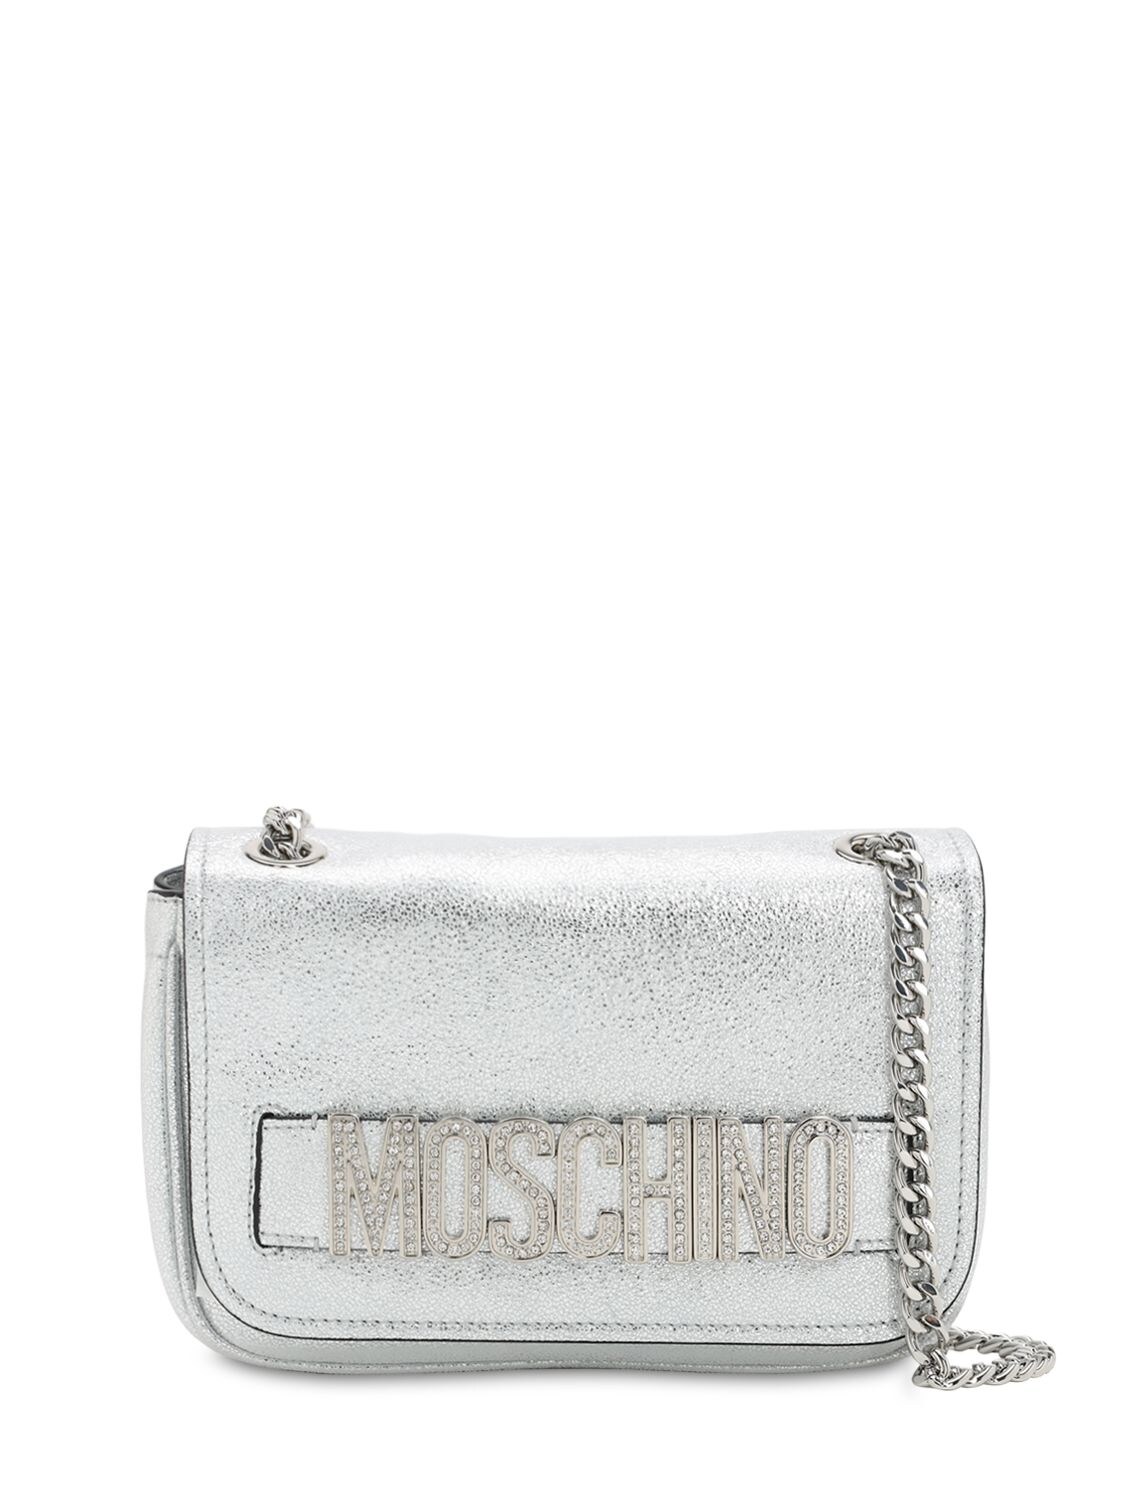 Moschino Metallic Leather Shoulder Bag In Silver